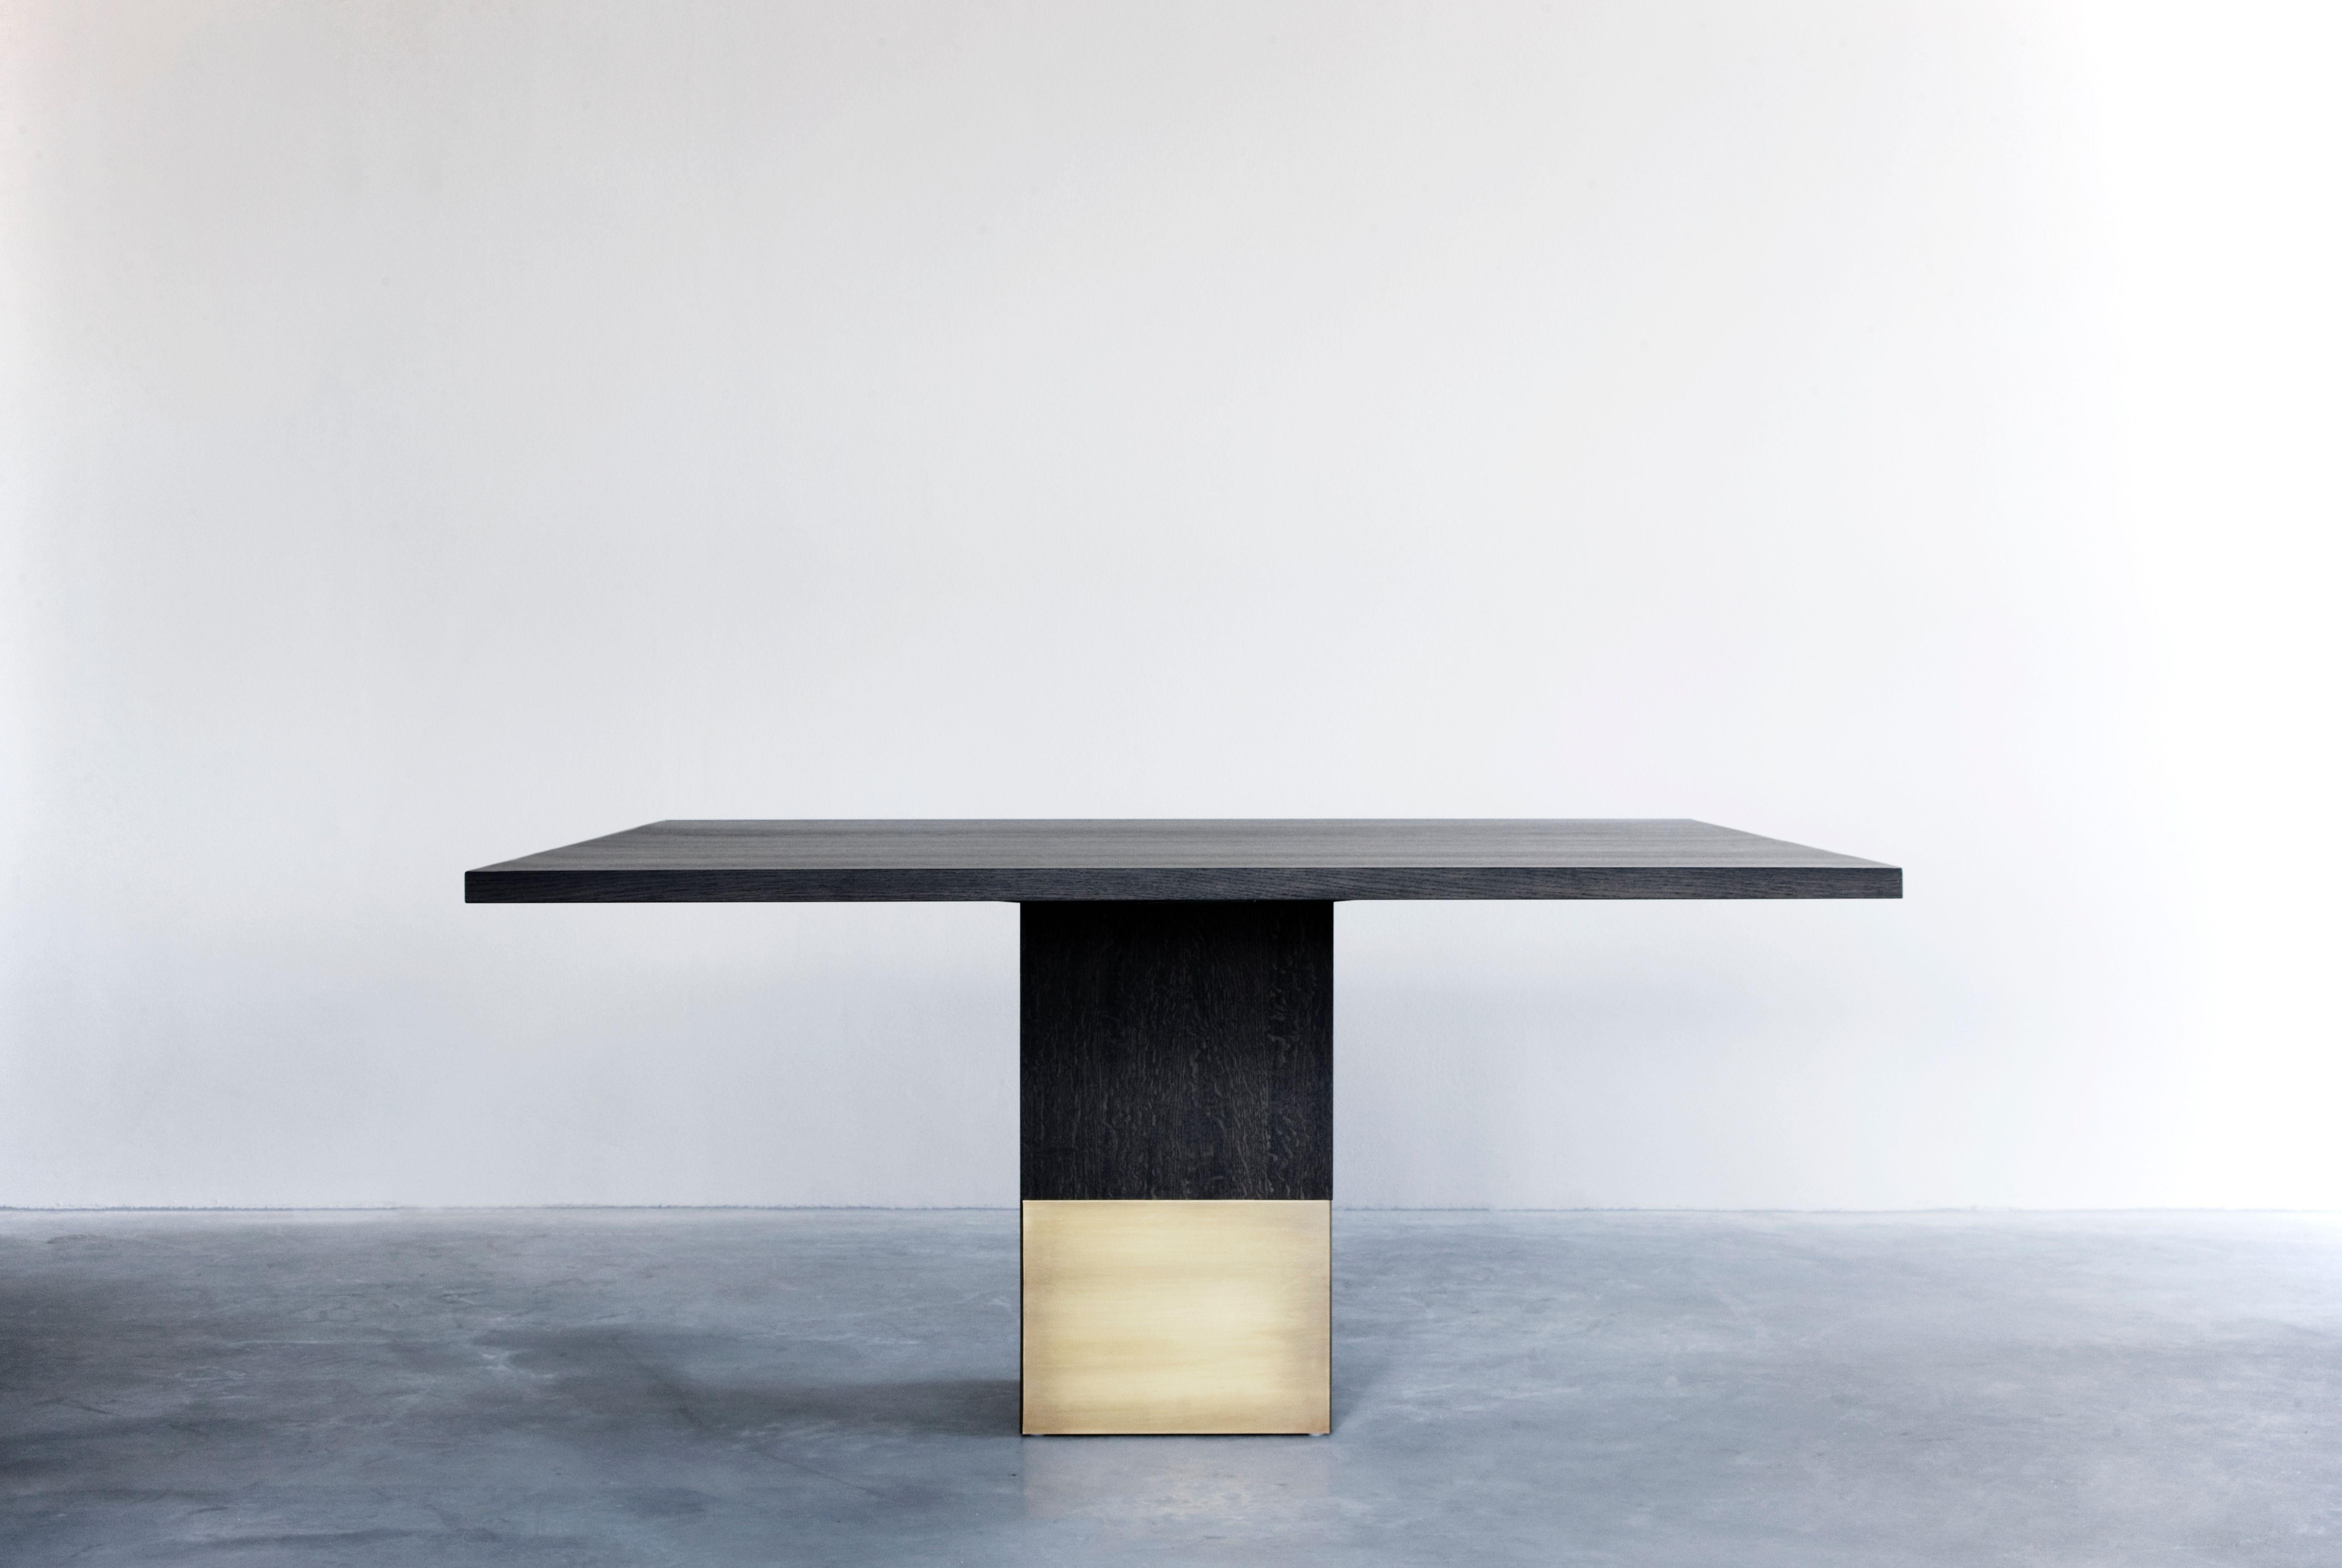 Nota Bene square table by Van Rossum
Dimensions: D140 x W140 x H75 cm
Materials: Oak, brass.

The wood is available in all standard Van Rossum colors, or in a matching finish to customer’s own sample.
Detailing is available in stainless steel